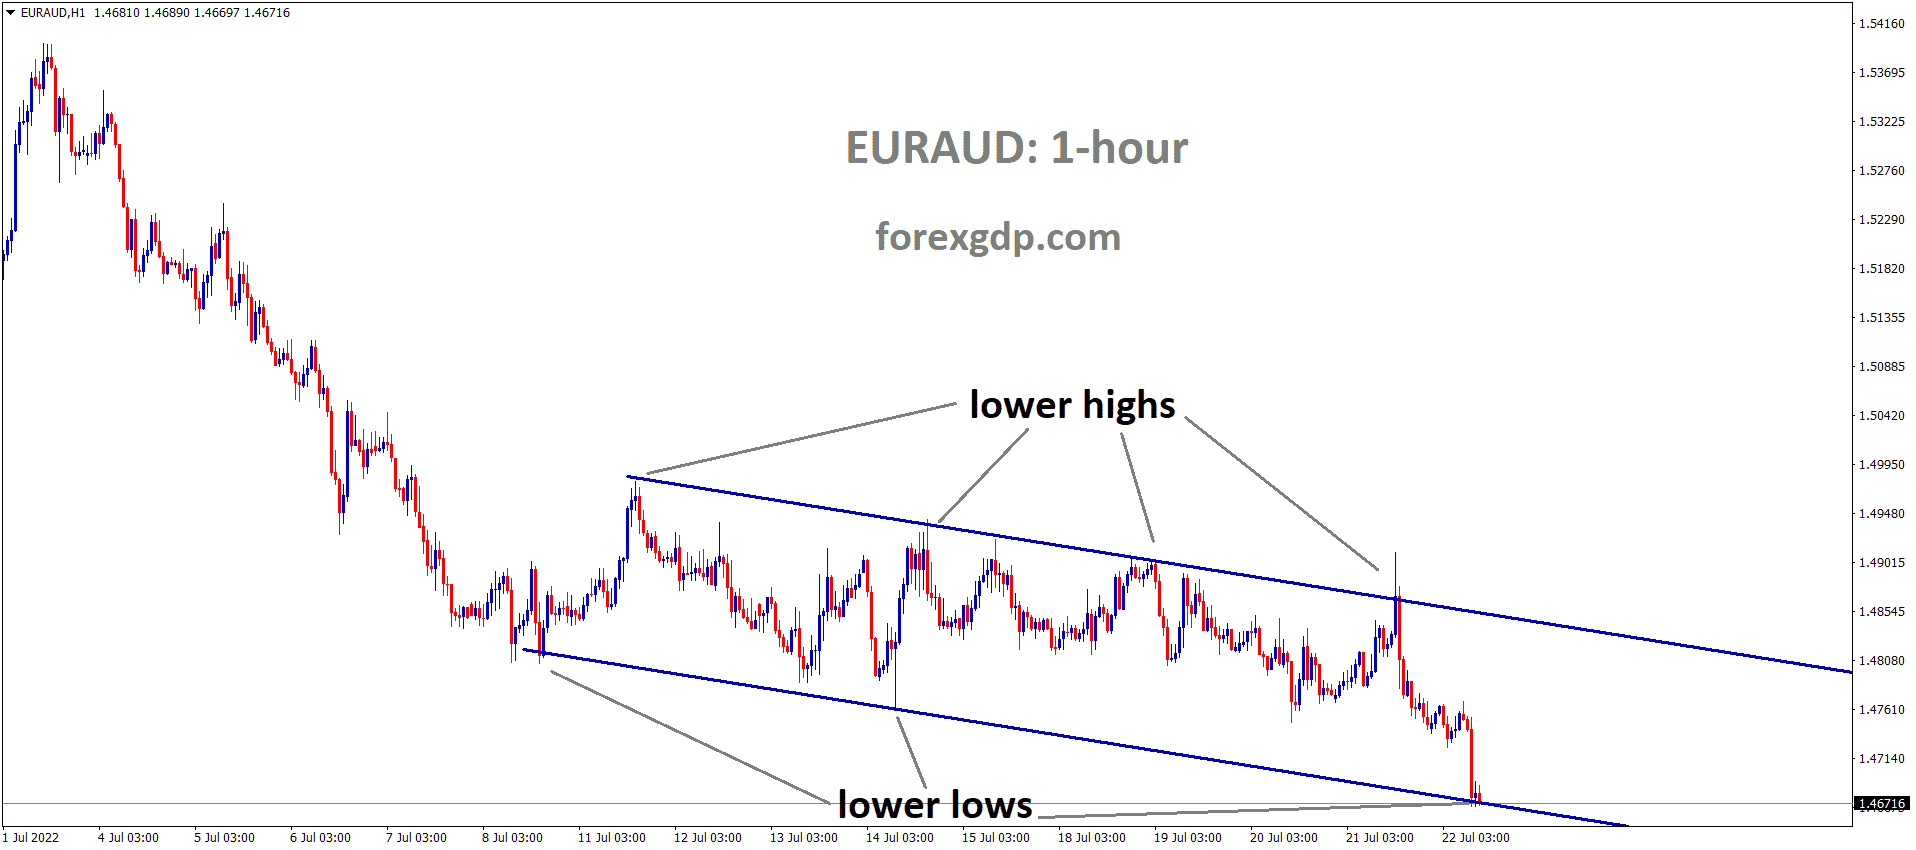 EURAUD is moving in the Descending channel and the Market has reached the Lower low area of the channel